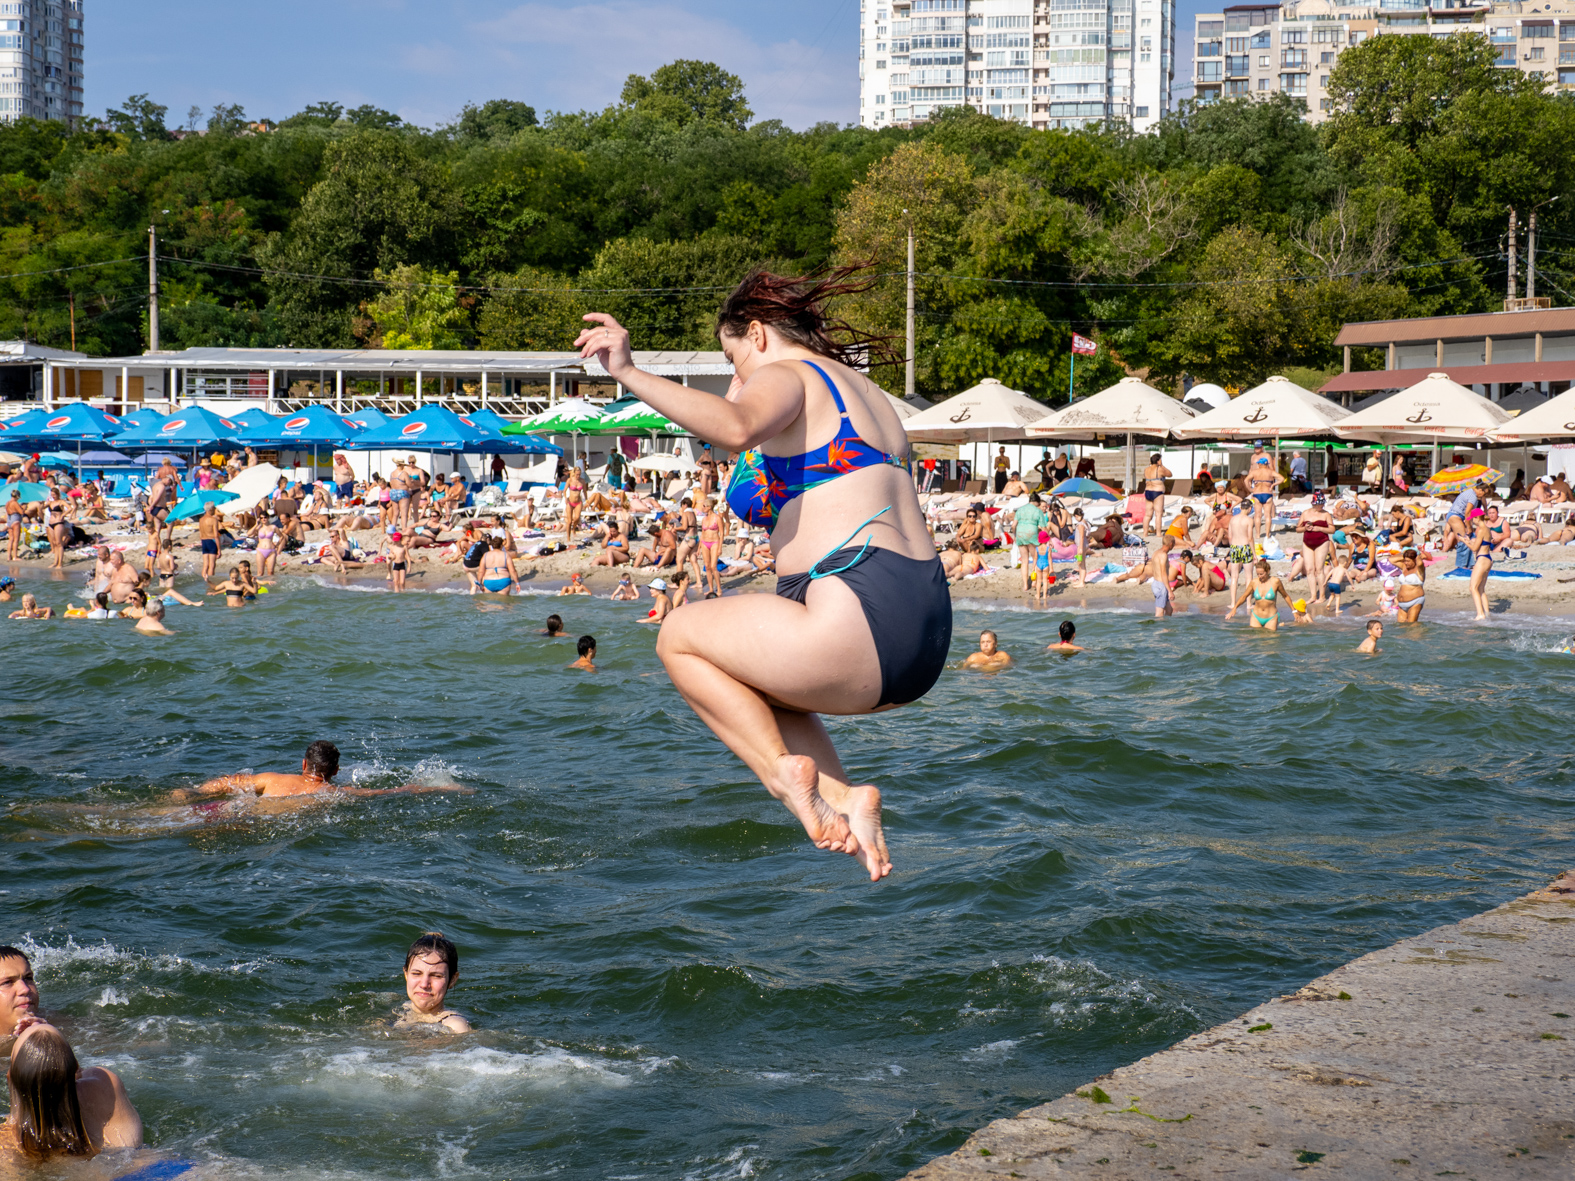 ODESSA, UKRAINE - AUGUST 26: Friends swim and jump into the sea on August 26, 2023 in Odessa, Ukraine. Several beaches in Ukraine's Black Sea city port of Odessa were officially reopened for swimming for the first time since the start of the Russian invasion, bathing remained banned during air raid alerts, an Anti-mine net was placed in between two piers to prevent swimmers encountering shallow-water mines many of which were dislodged by flood waters from the destruction of Kakhovka dam under control of the Russian military. The opening of the beaches has been a welcome respite from the tensions of war. (Photo by Peter Dench/Getty Images)